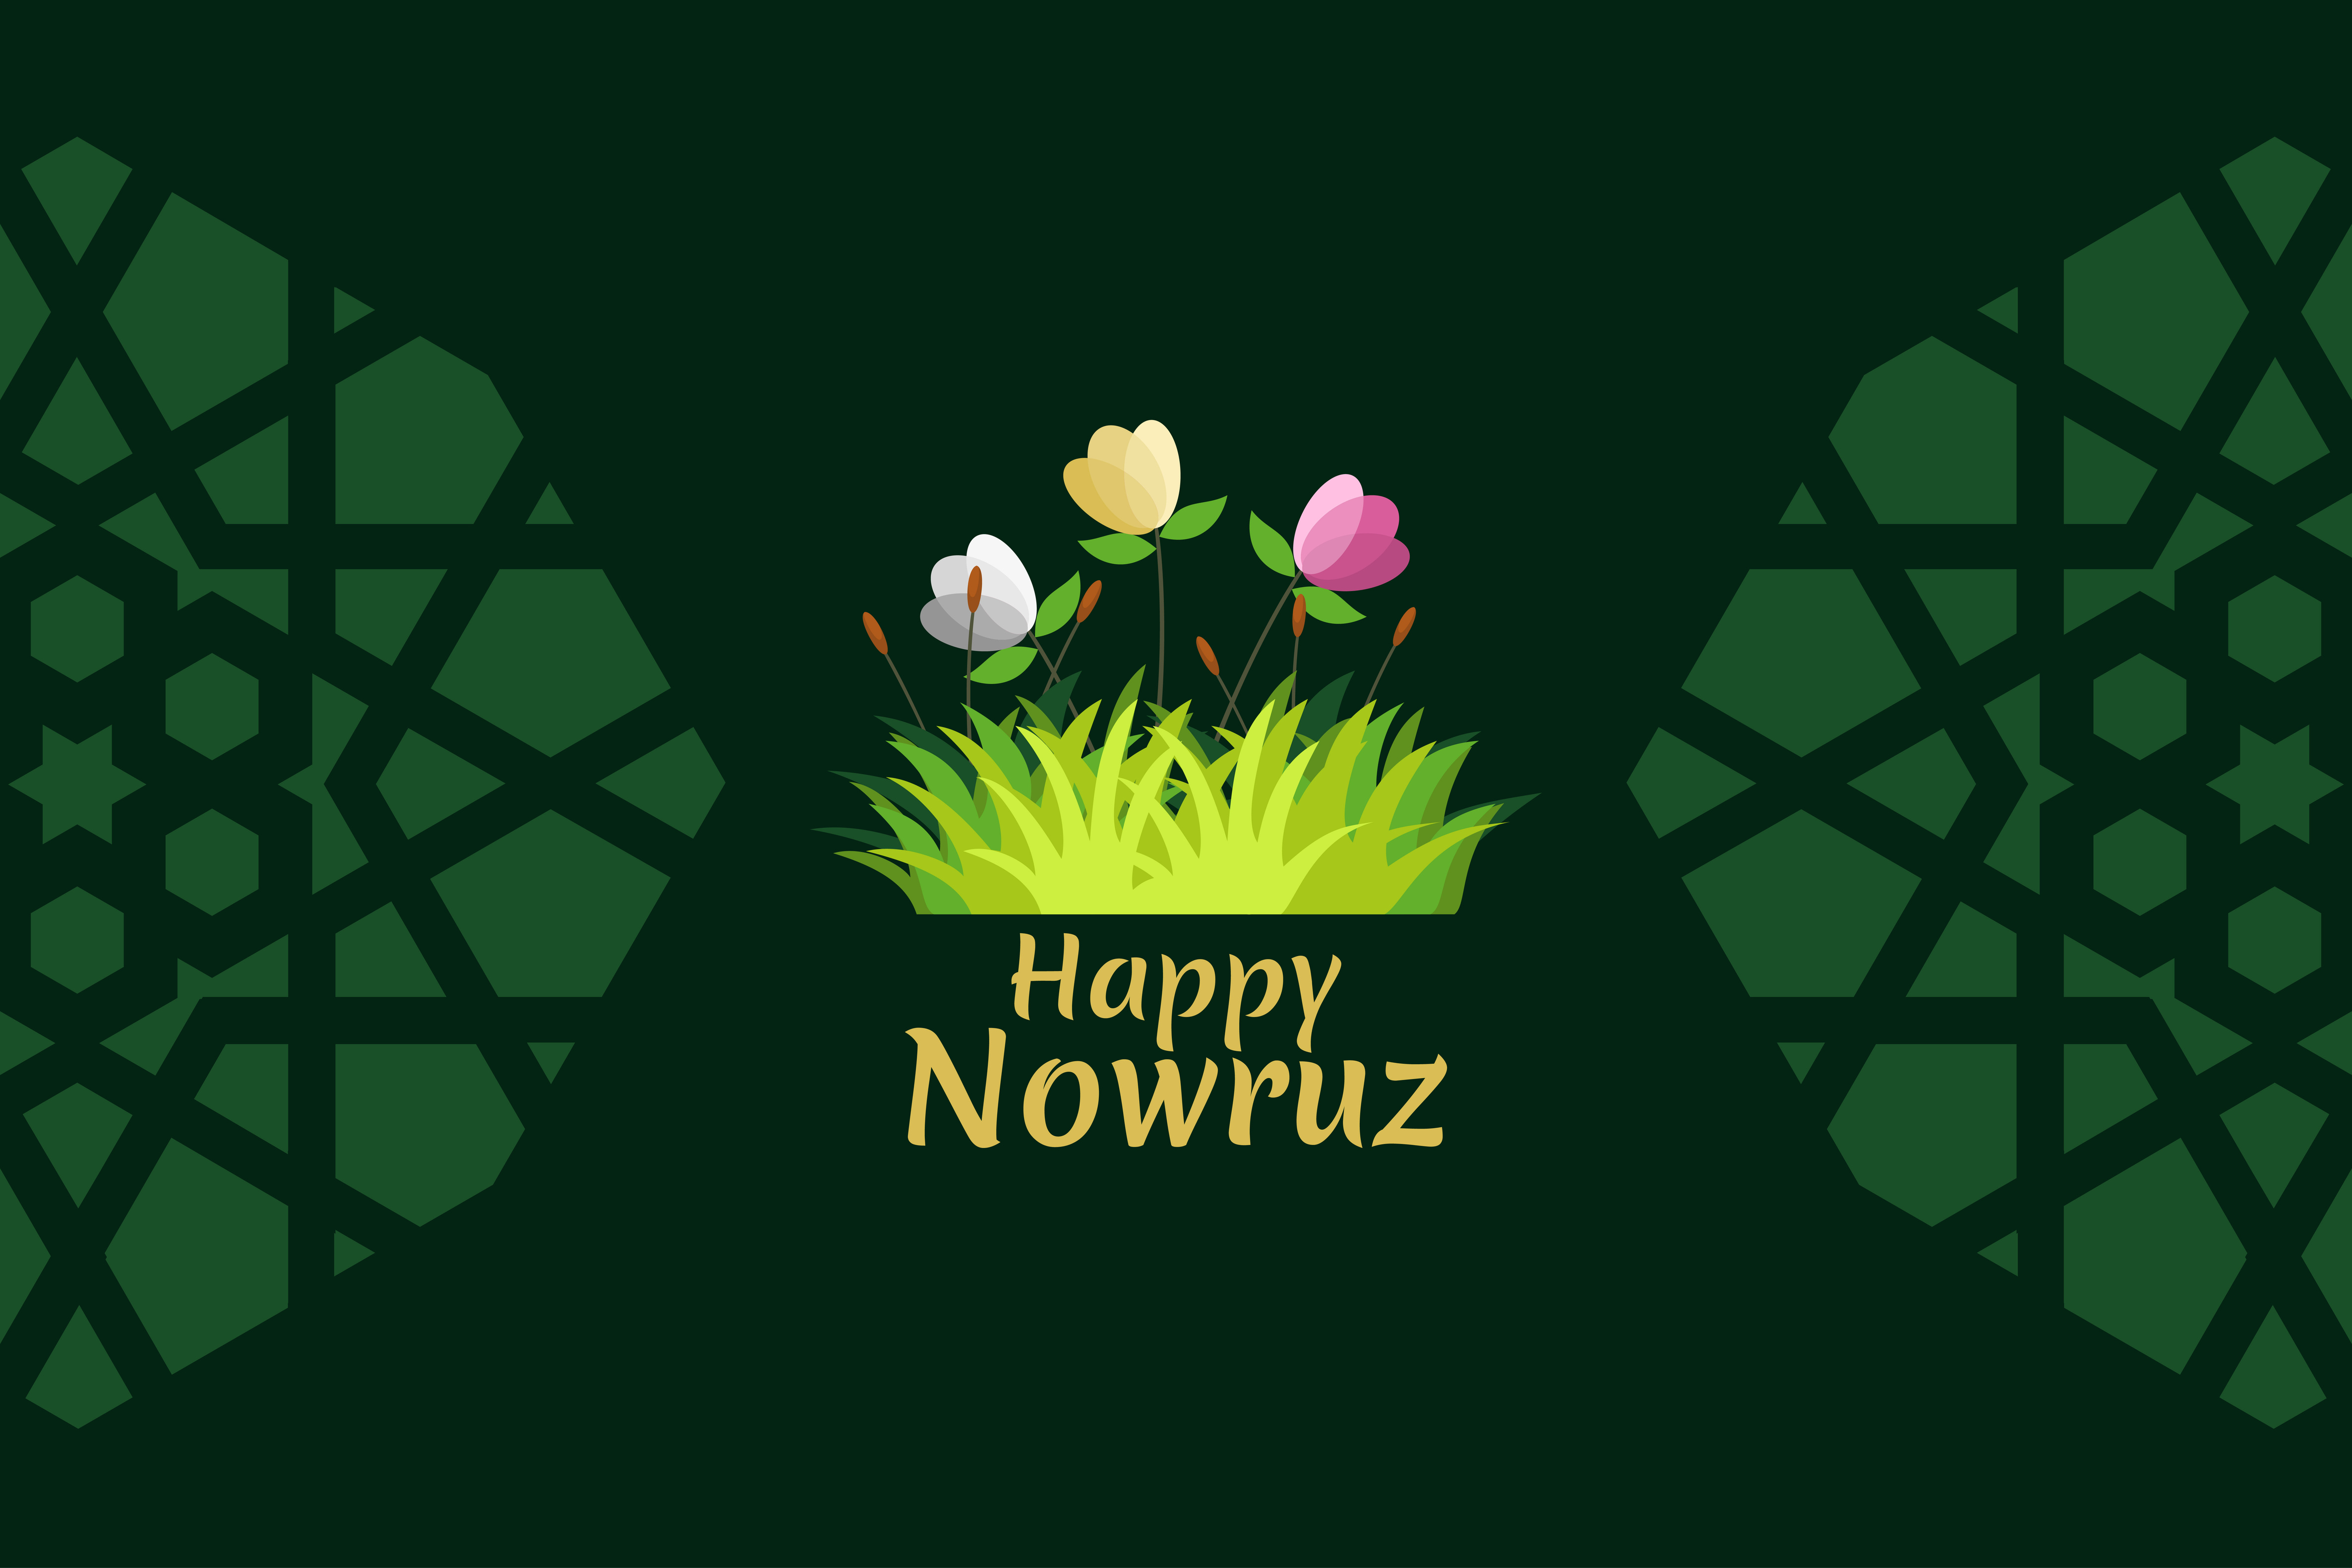 Happy Nowruz on a dark green background with grass and flowers above the words